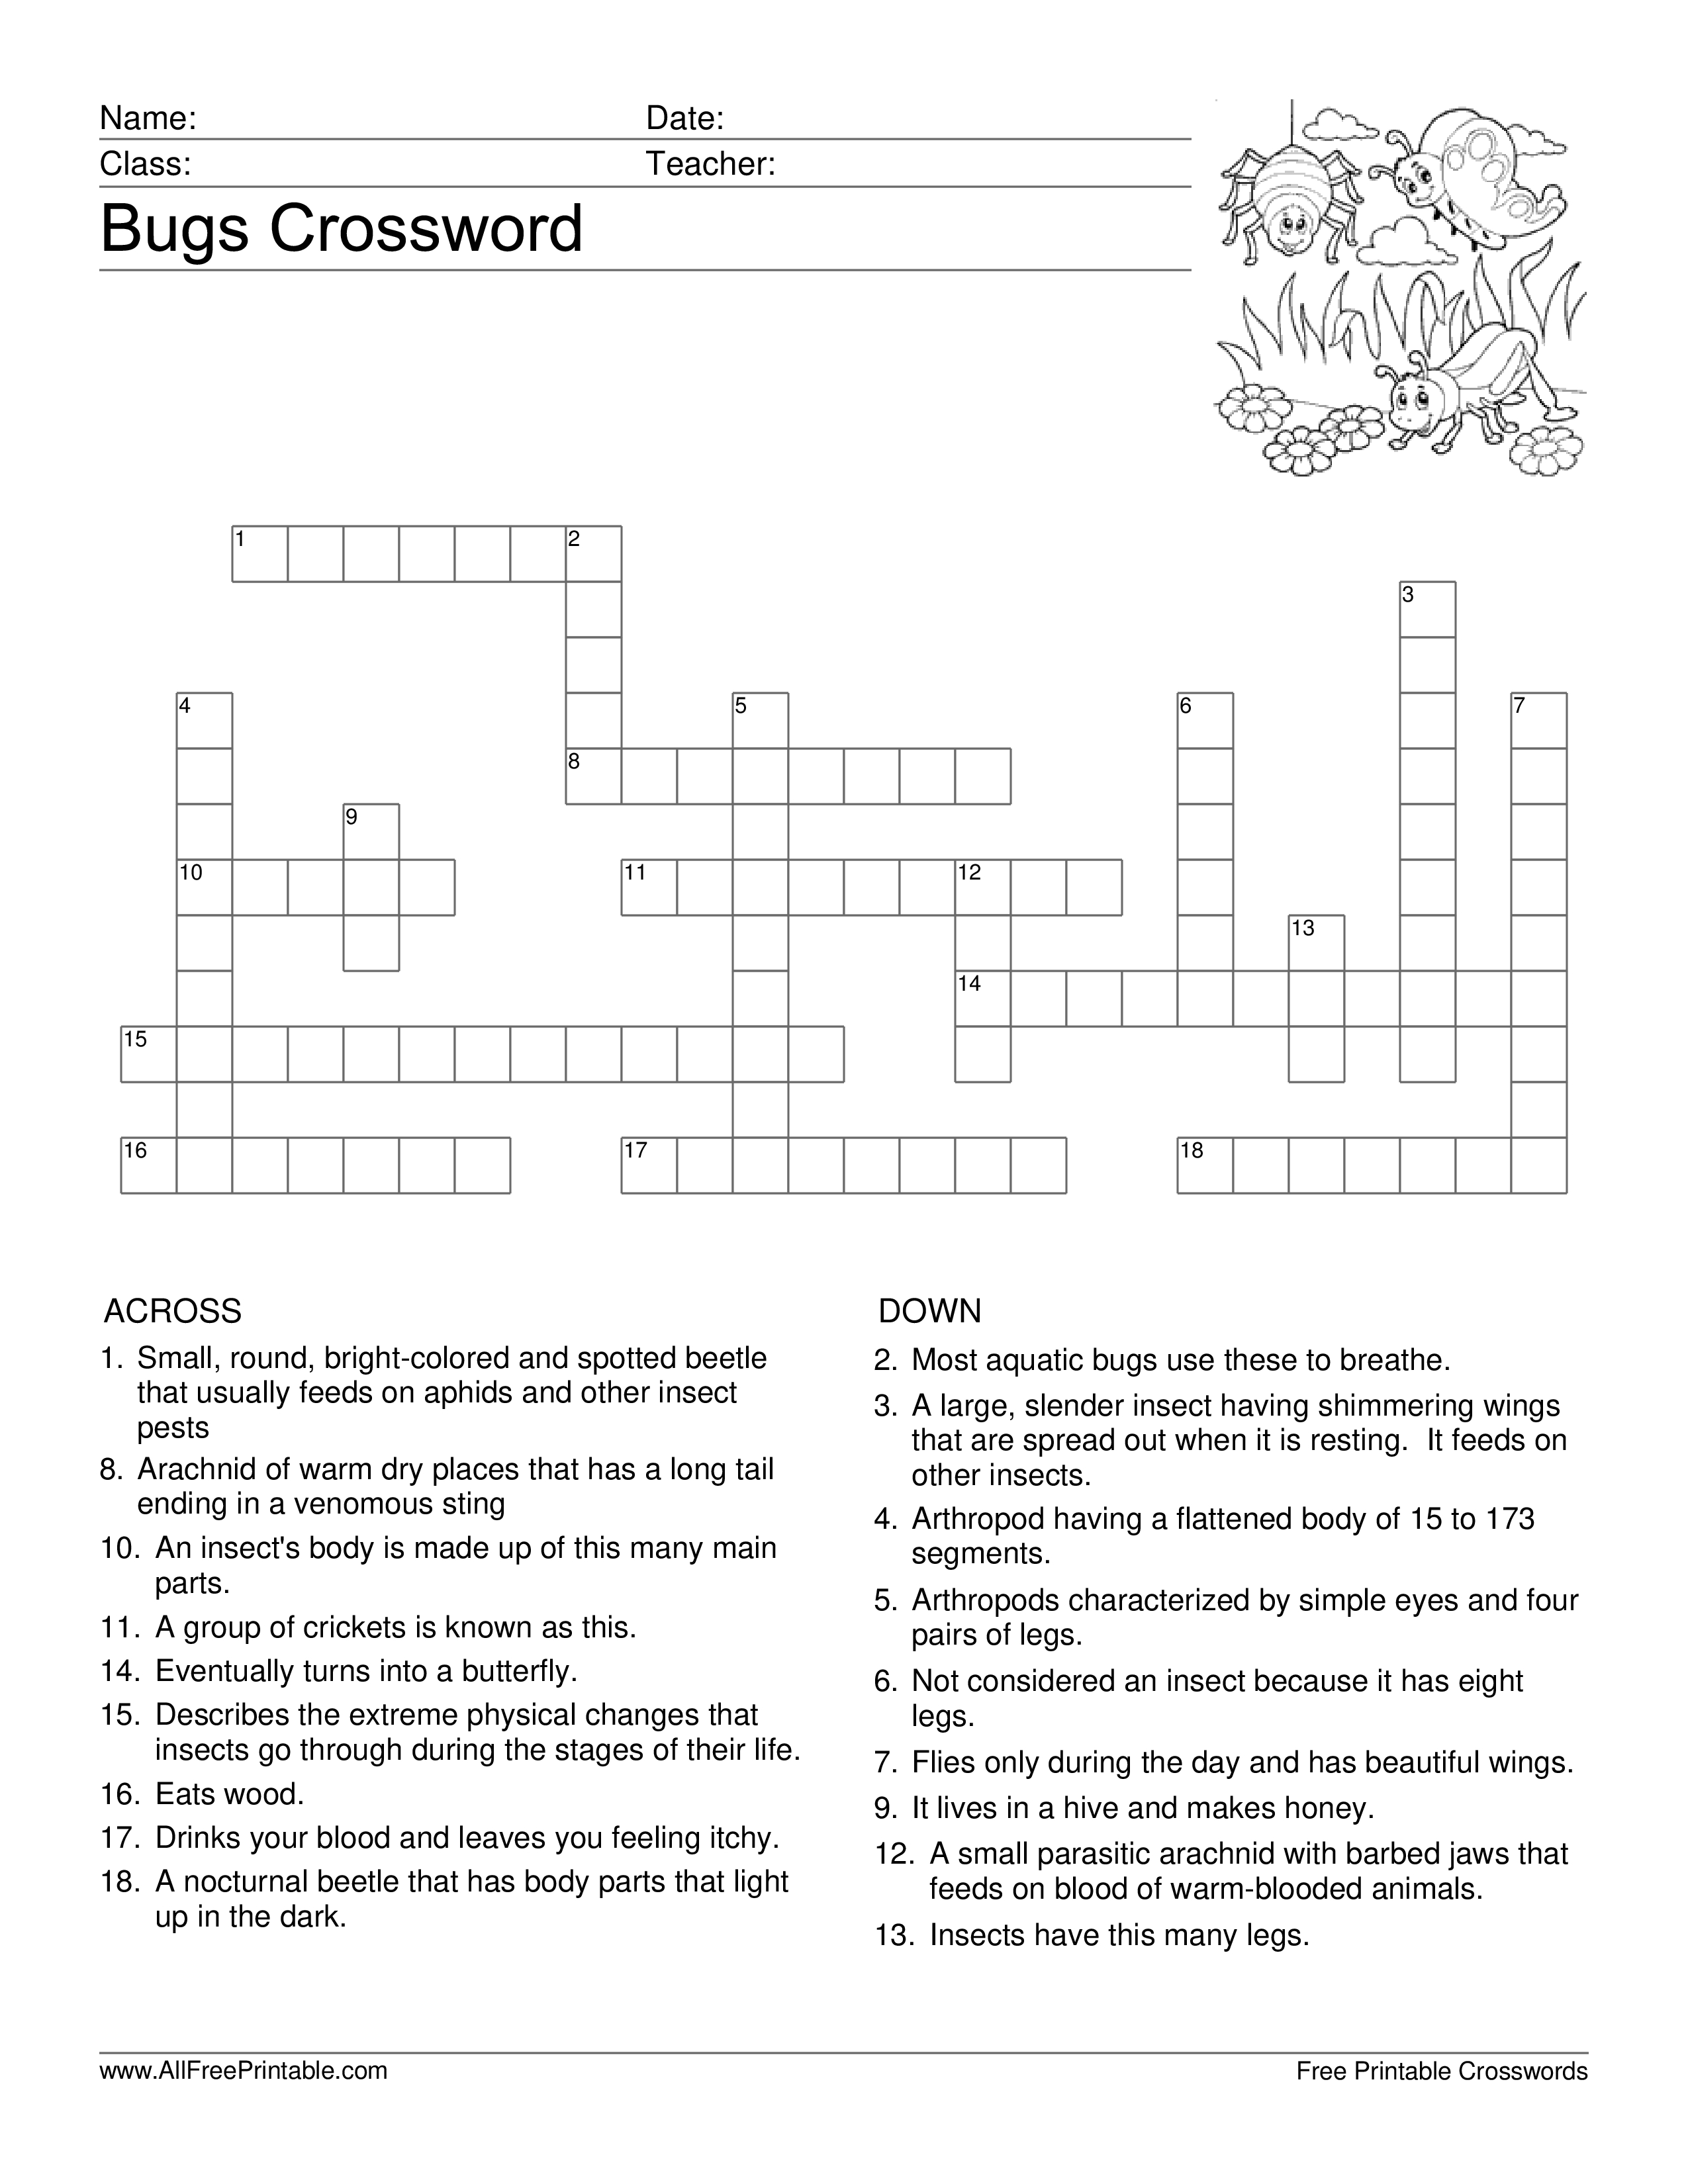 Bugs Crossword Puzzle Template | Templates At Allbusinesstemplates - Printable Crossword Template